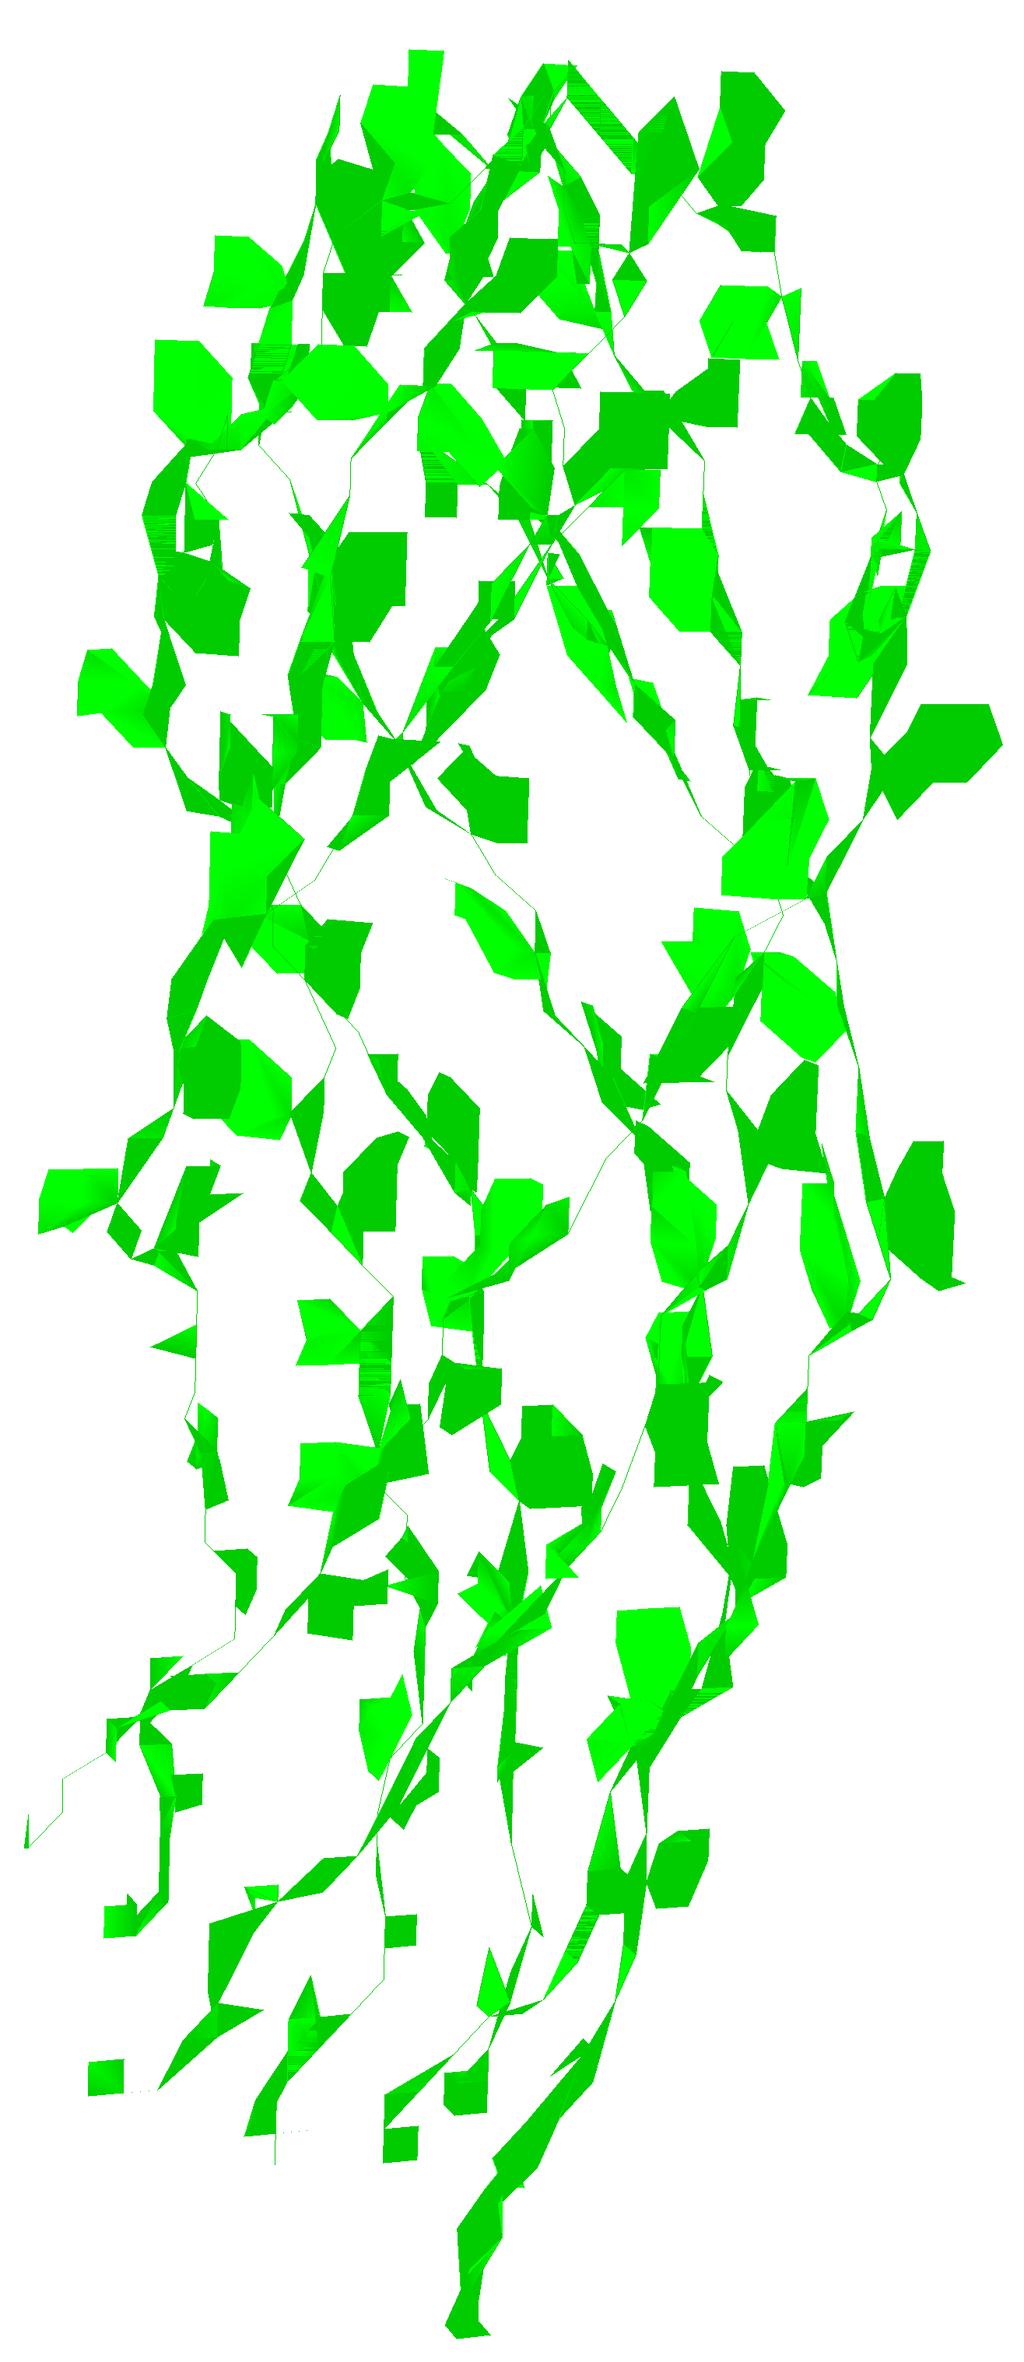 Given a mesh, the quantized 3D vertices are first partitioned into an octree (OT) structure, which is then traversed from the root and gradually to the leaves.